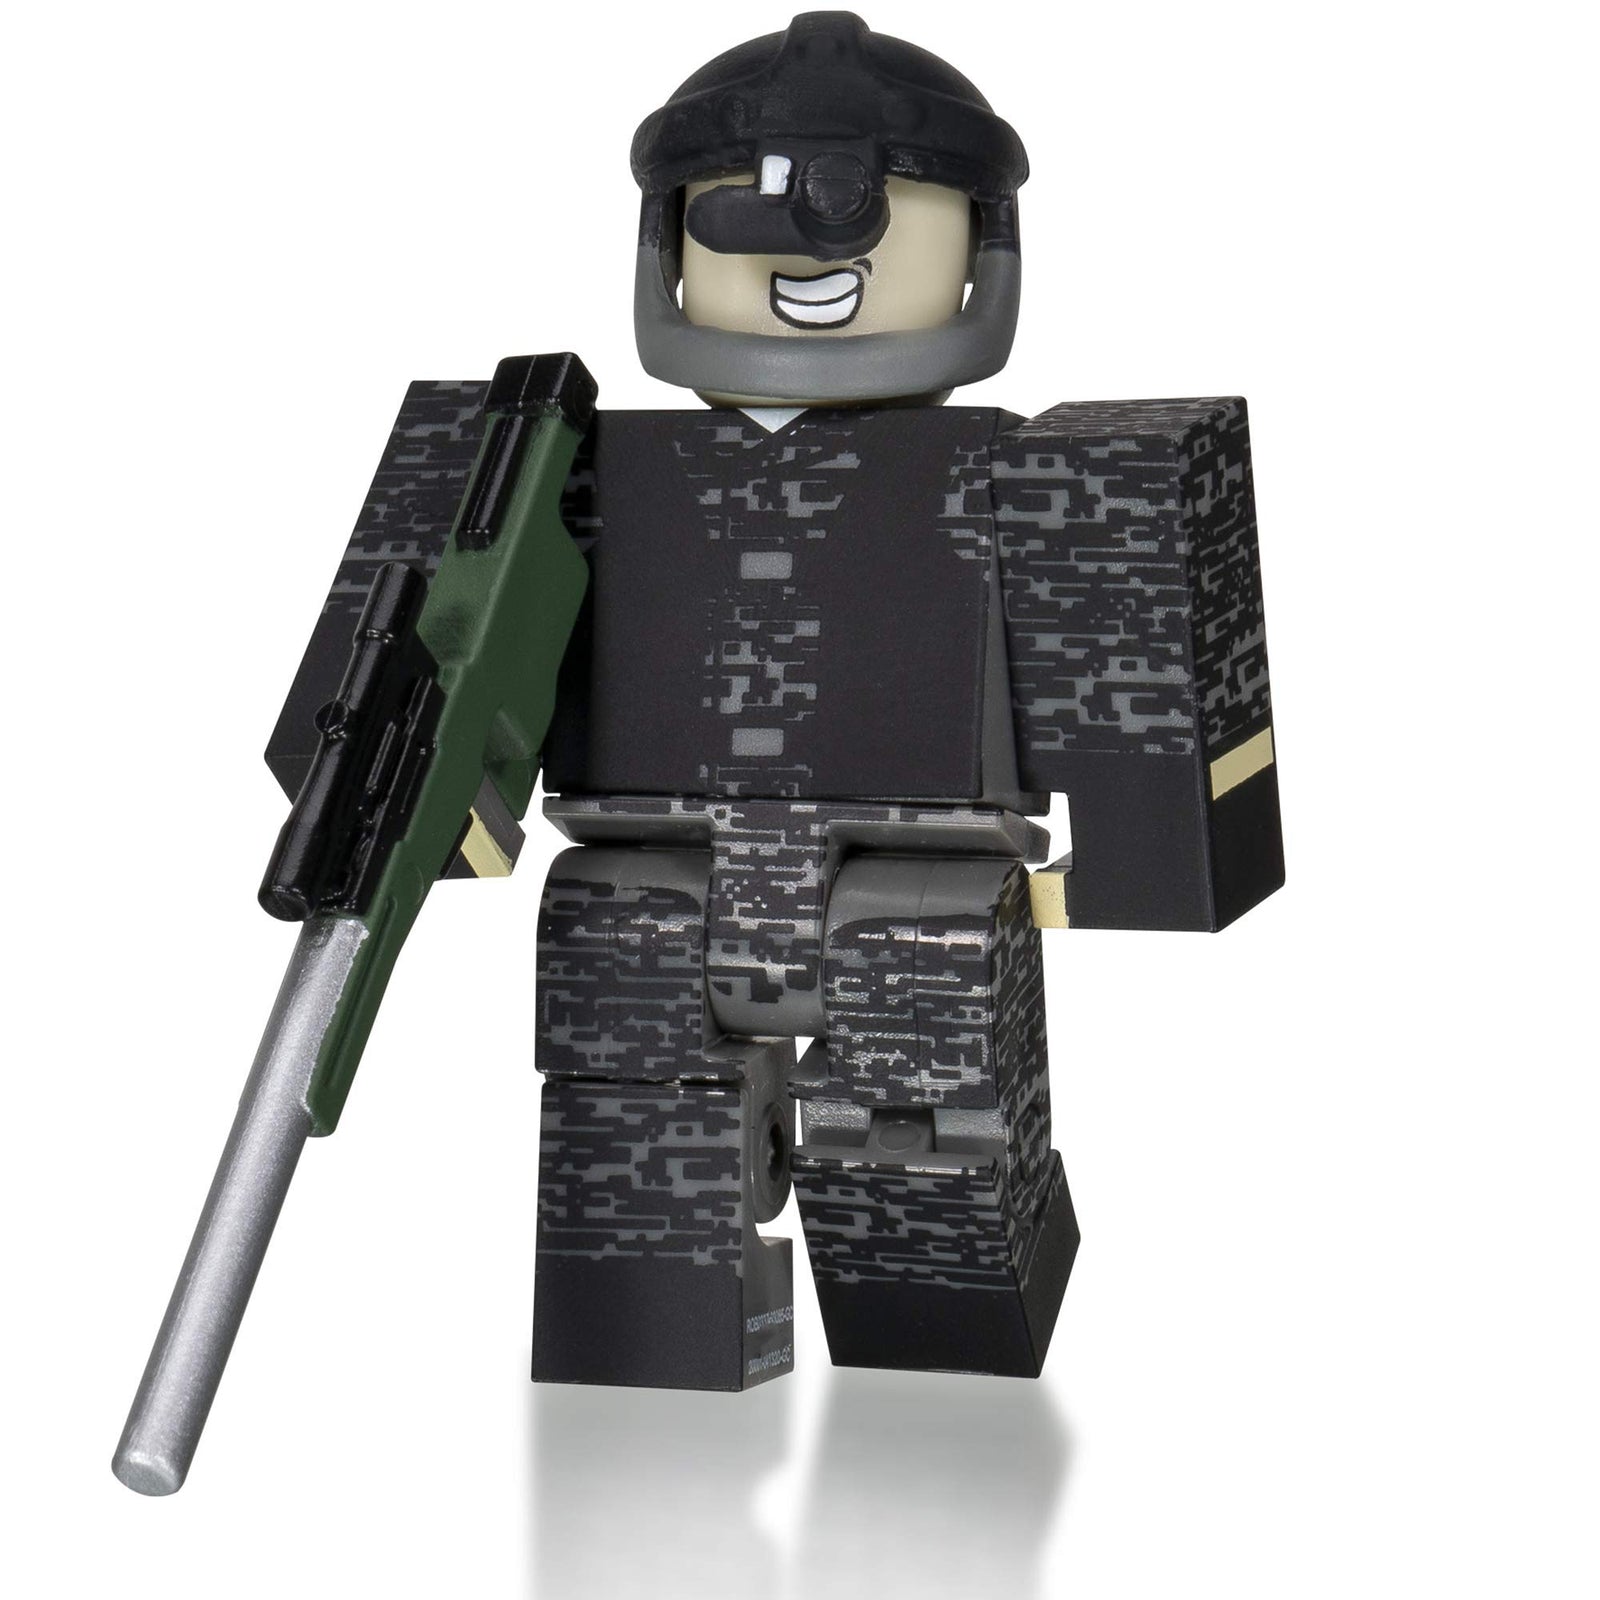 Roblox Action Collection - Apocalypse Rising 2 Six Figure Pack [Includes Exclusive Virtual Item]